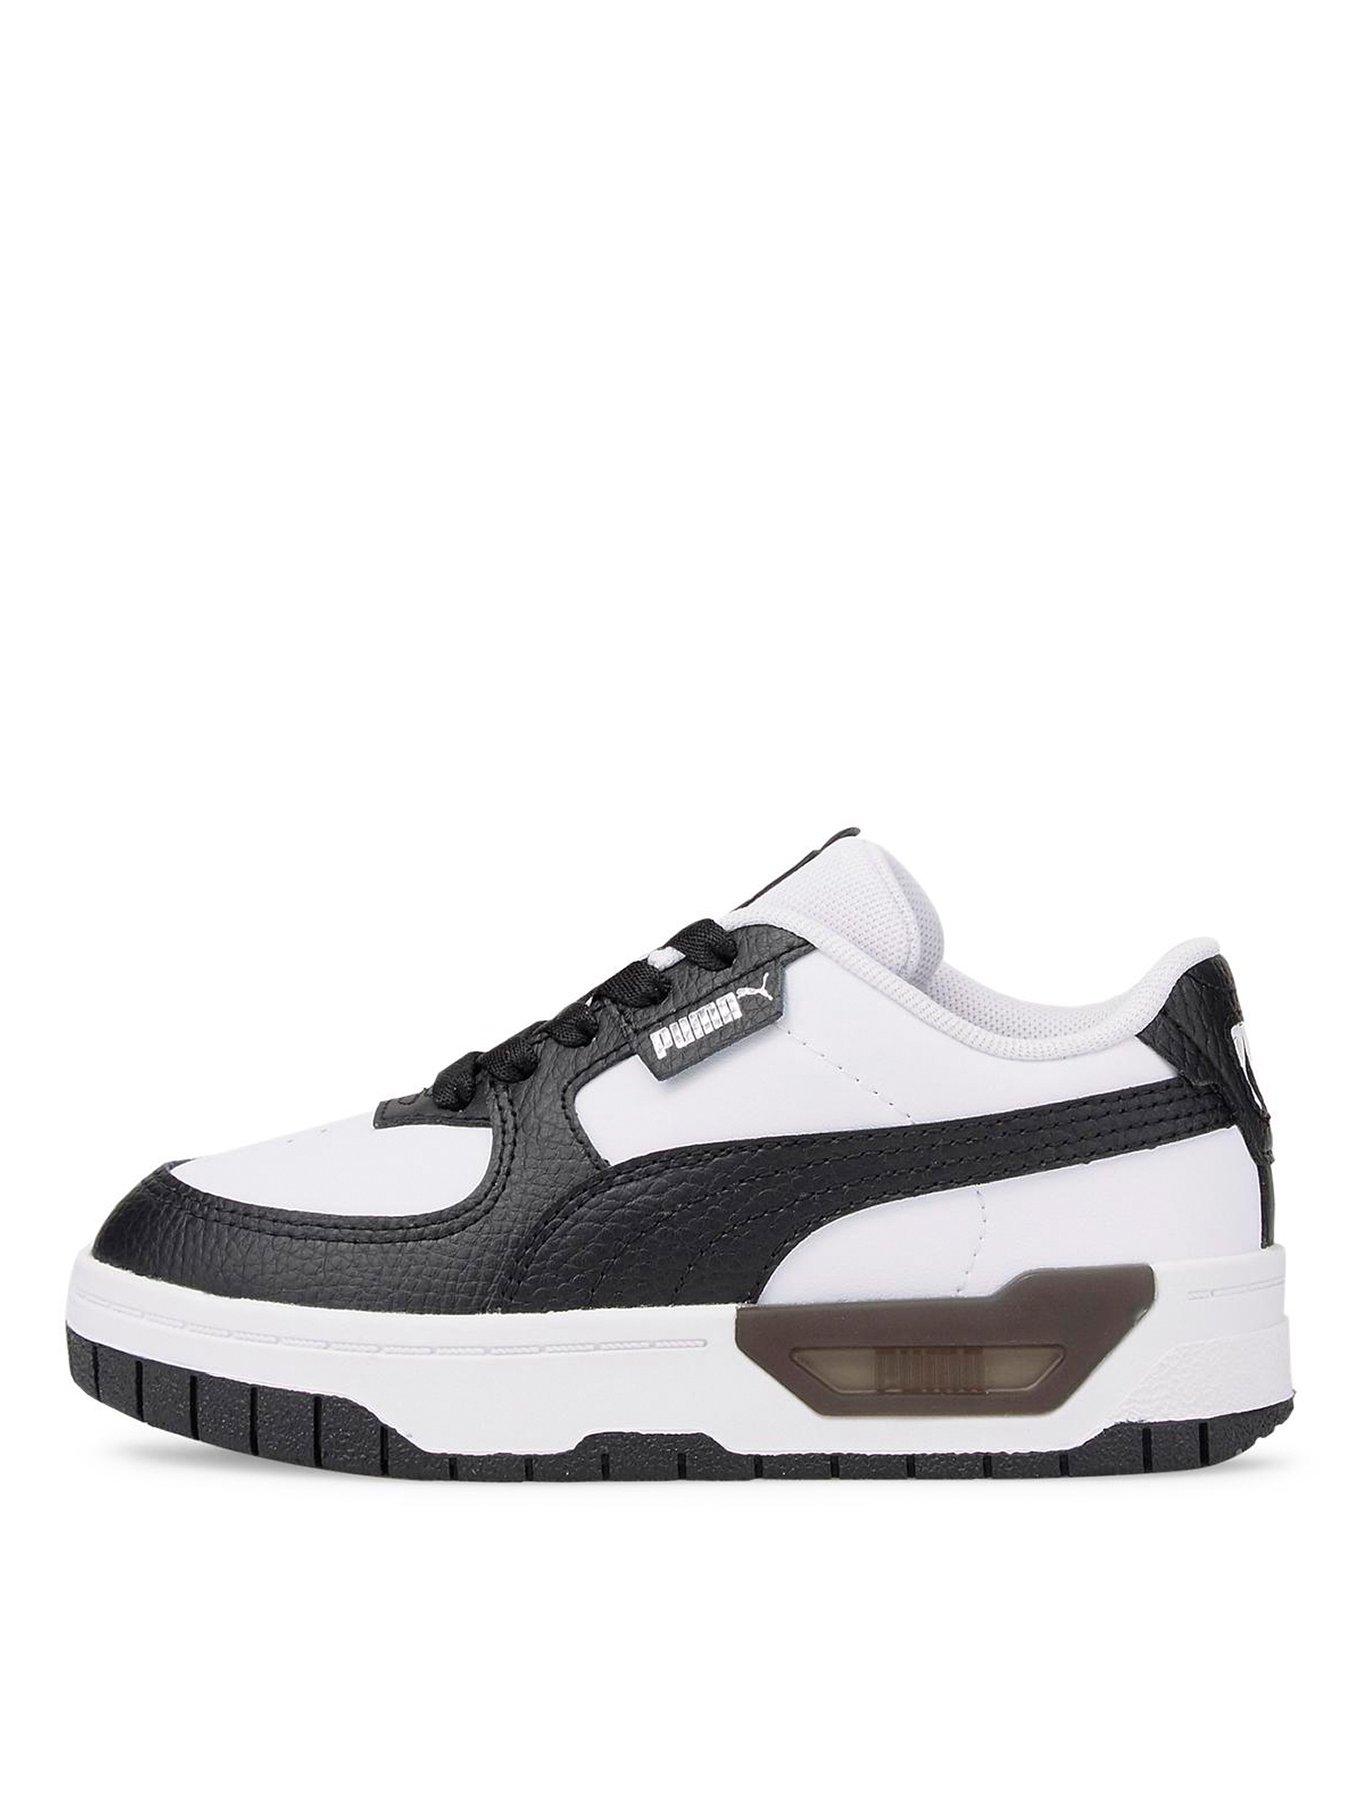 Puma Girls Younger Cali Dream Leather Trainers - White/Black, White/Black, Size 11 Younger